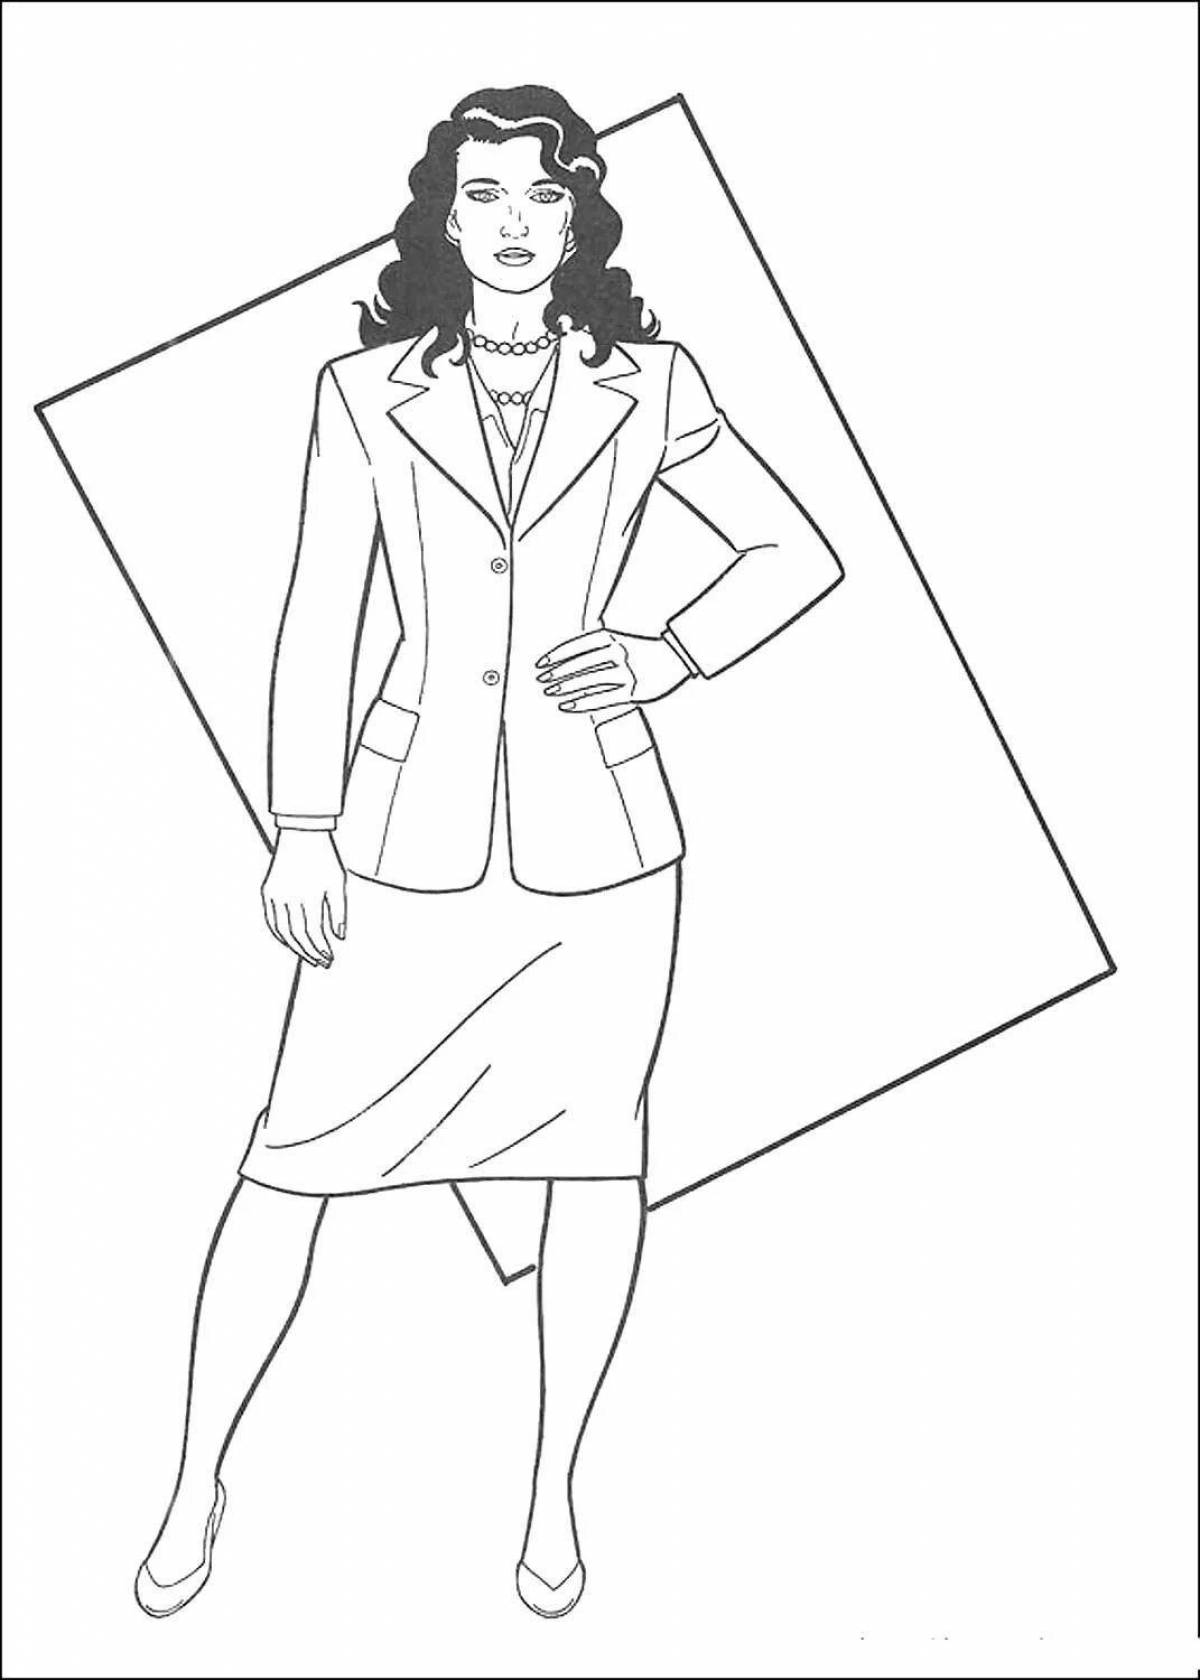 Coloring page charming woman for children